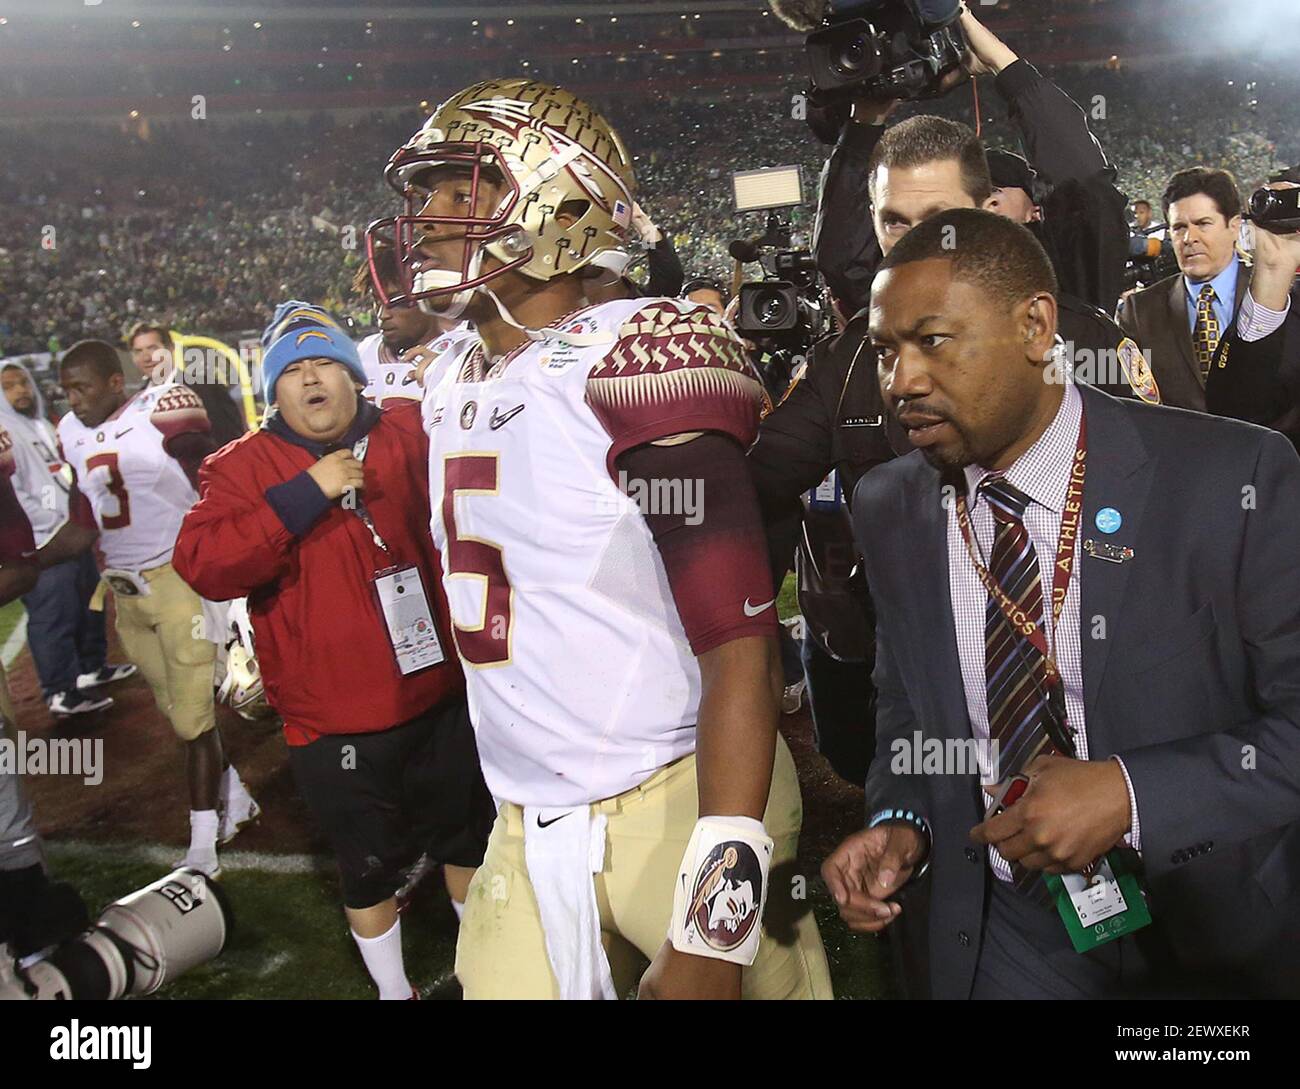 FSU quarterback Jameis Winston walks off the field, dejected after losing the Rose Bowl College Football Semifinal game to Oregon on Thursday, Jan. 1, 2015 in Pasadena, Calif. Oregon won 59-20. (Photo by Stephen M. Dowell/Orlando Sentinel/TNS/Sipa USA) Stock Photo